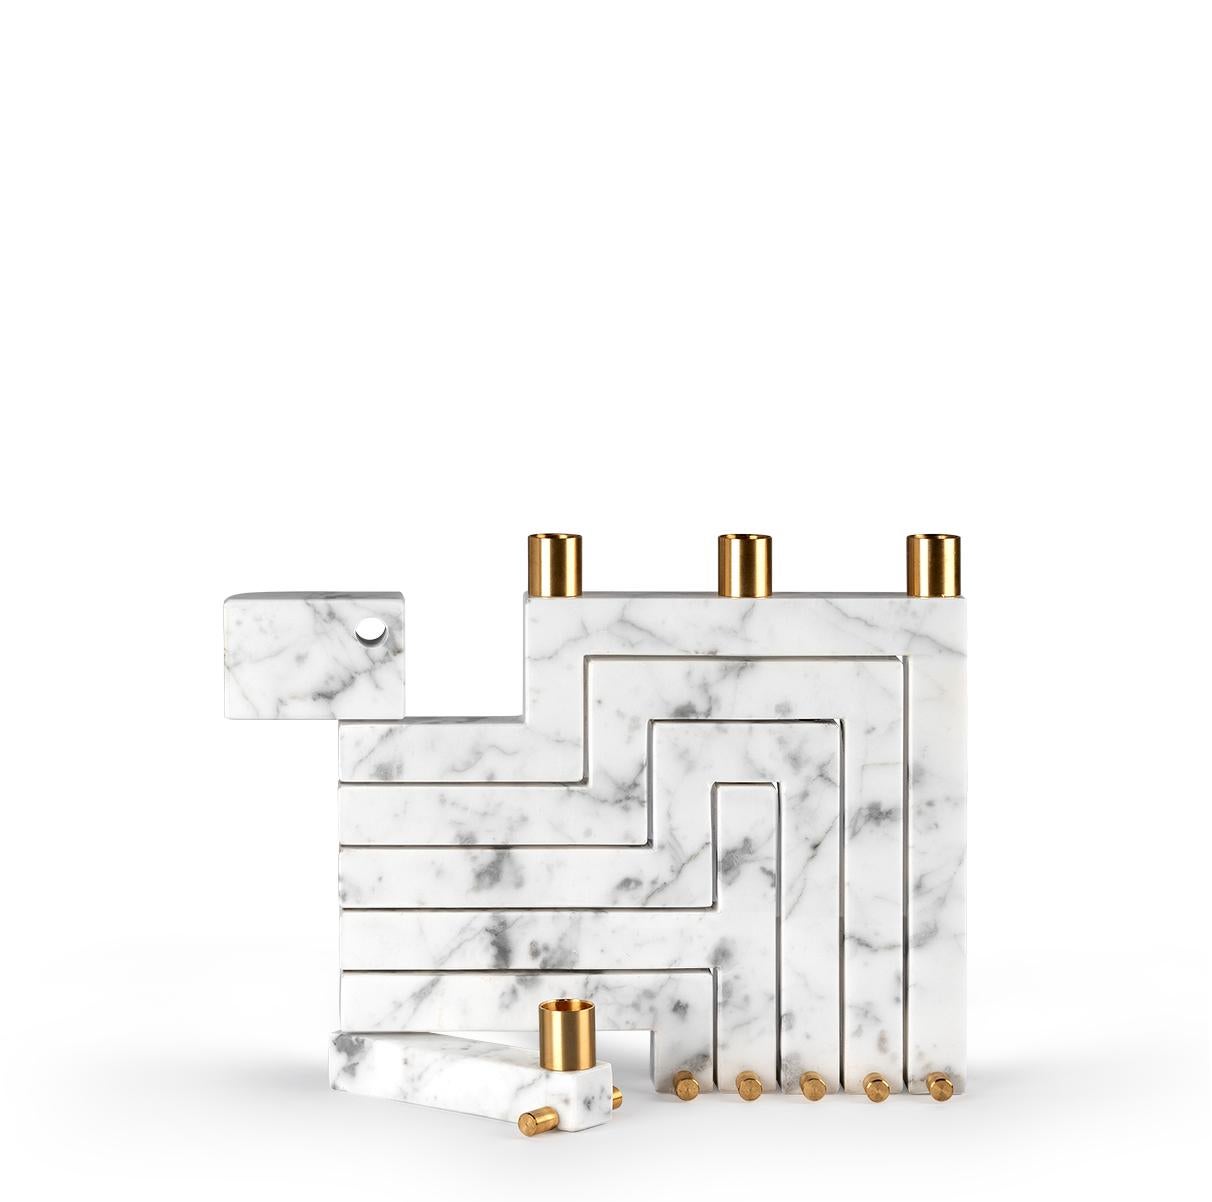 The Vestalia White Bianco Carrara Marble and Brass Details Candleholder is a unique and eye-catching sculptural piece.
When it is closed, the candelabrum appears like a monolithic marble slab. With just a few small touches, however, Vestalia opens